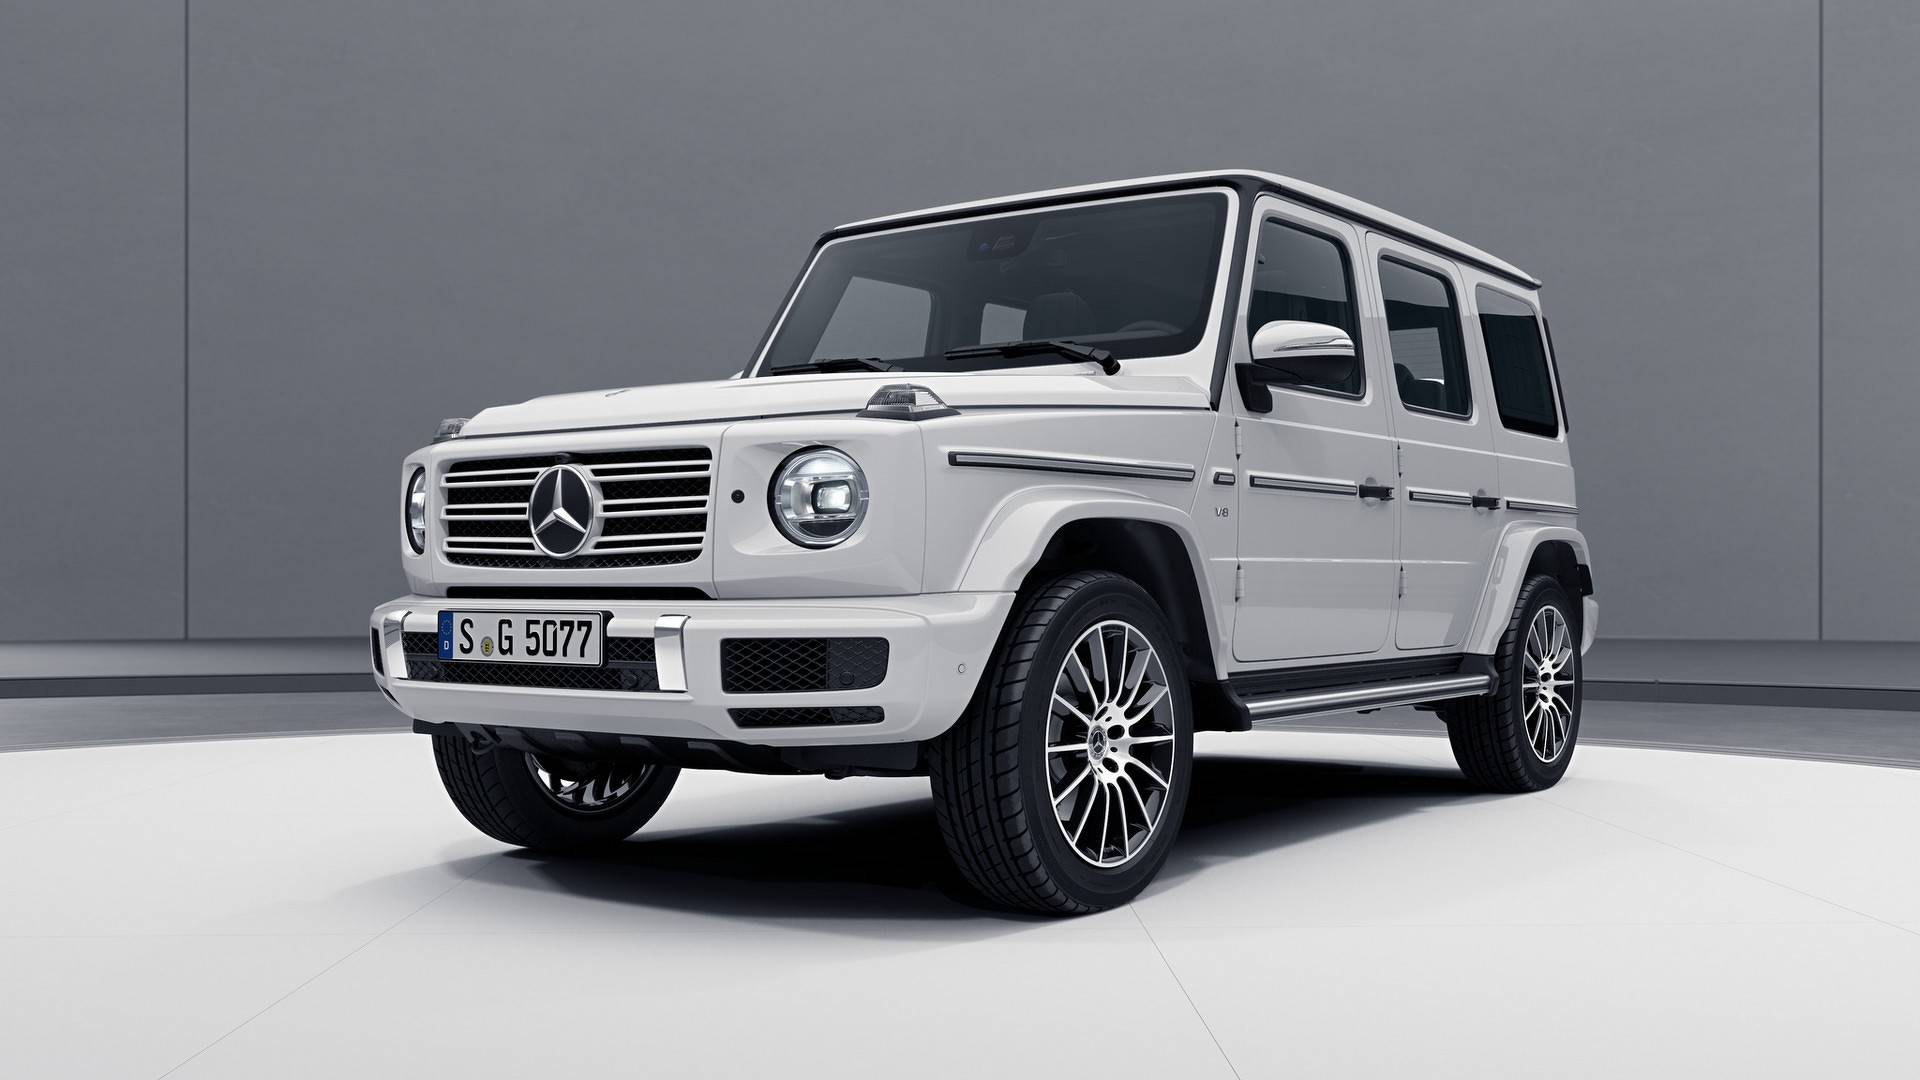 2019 Mercedes G-Class AMG Line Shows Its Sporty Side